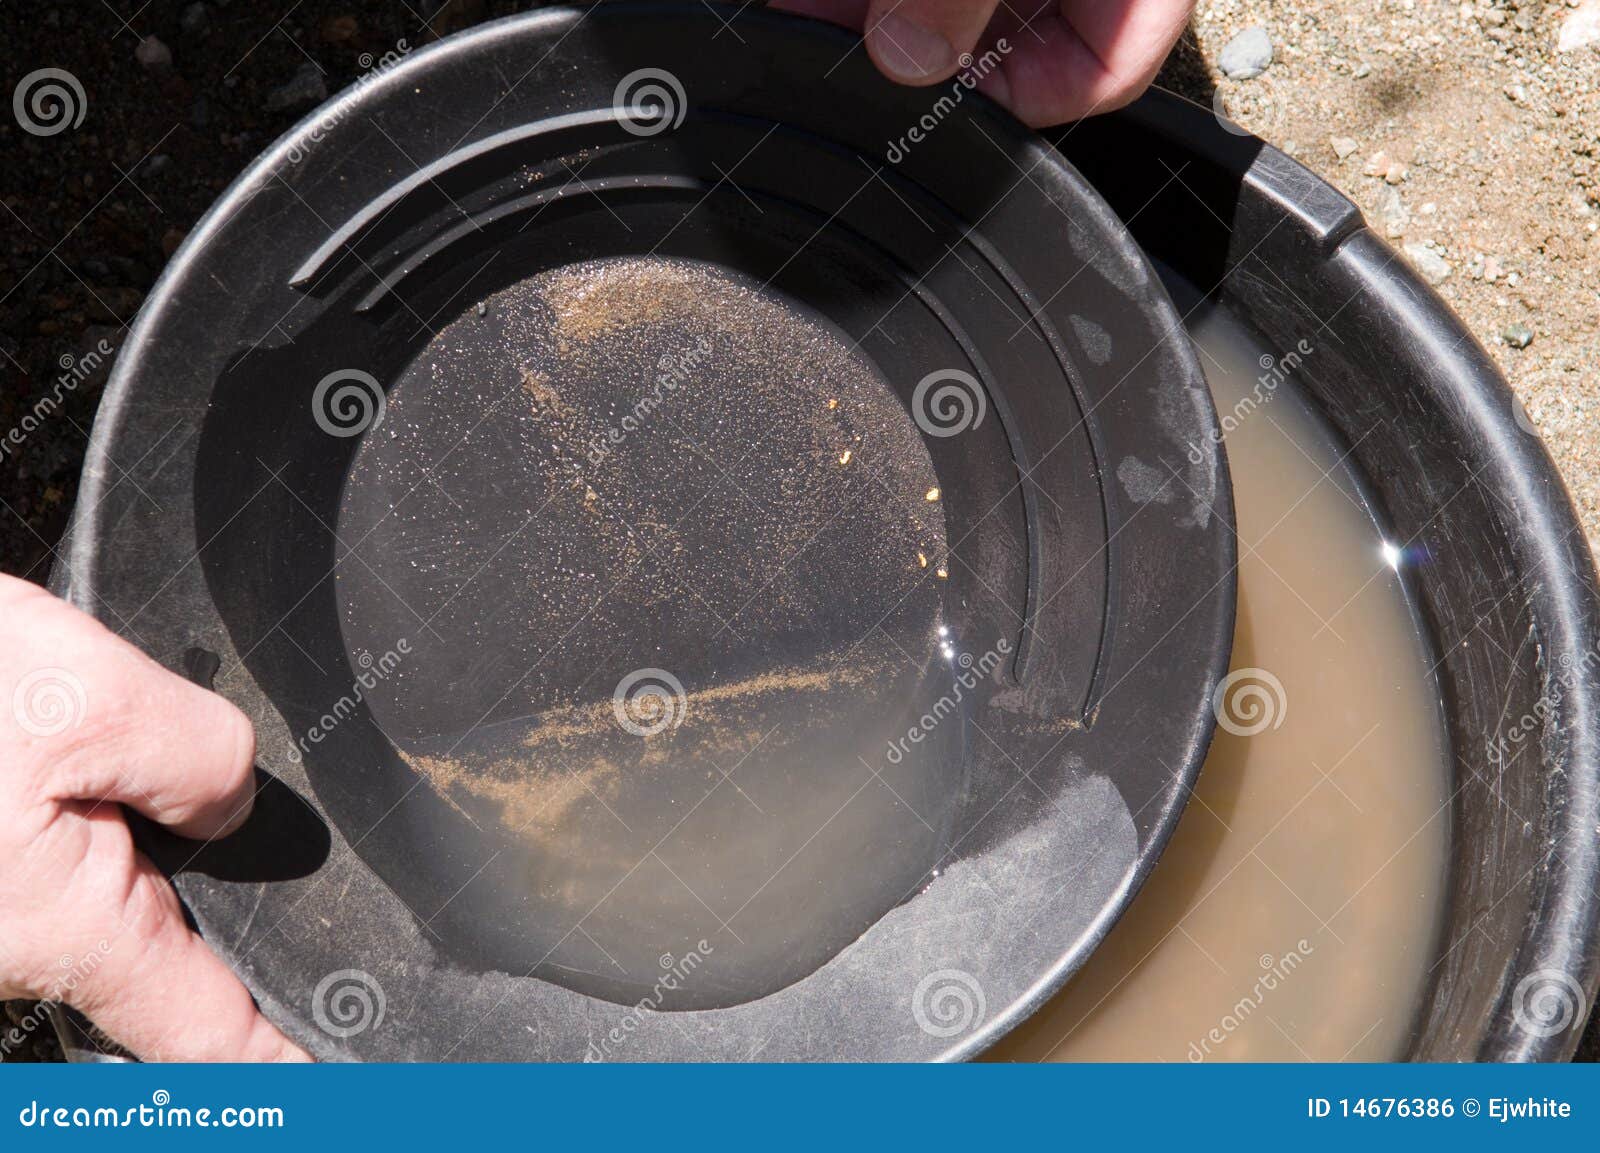 panning for gold - success!